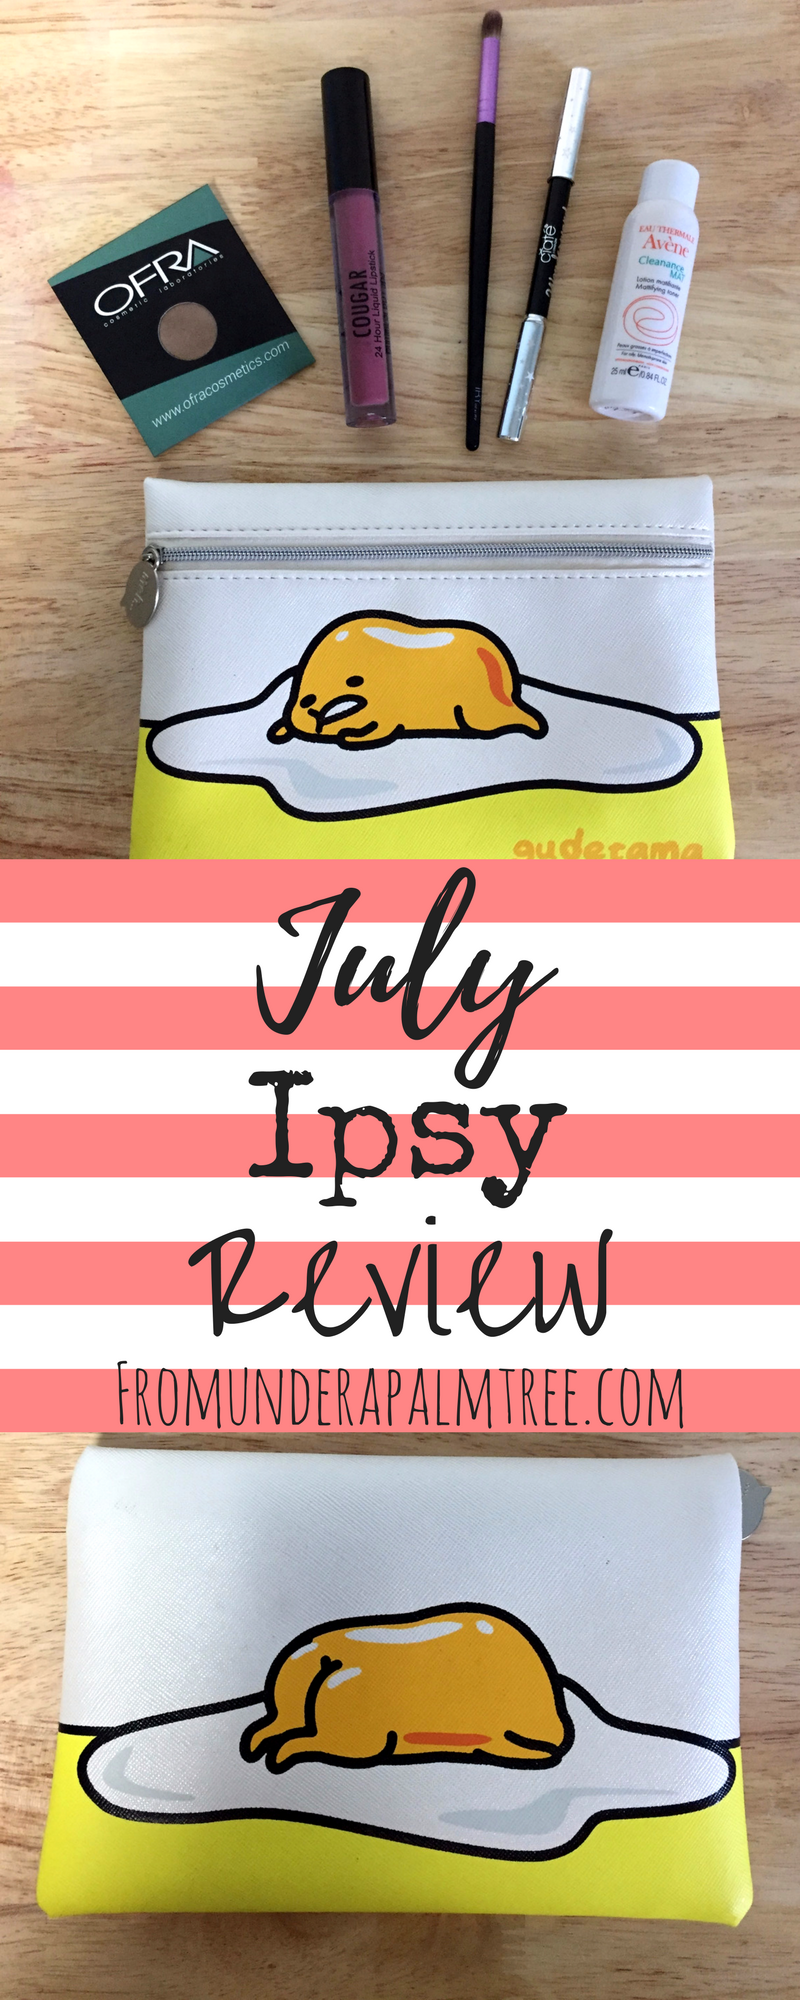 July Ipsy Review by From Under a Palm Tree